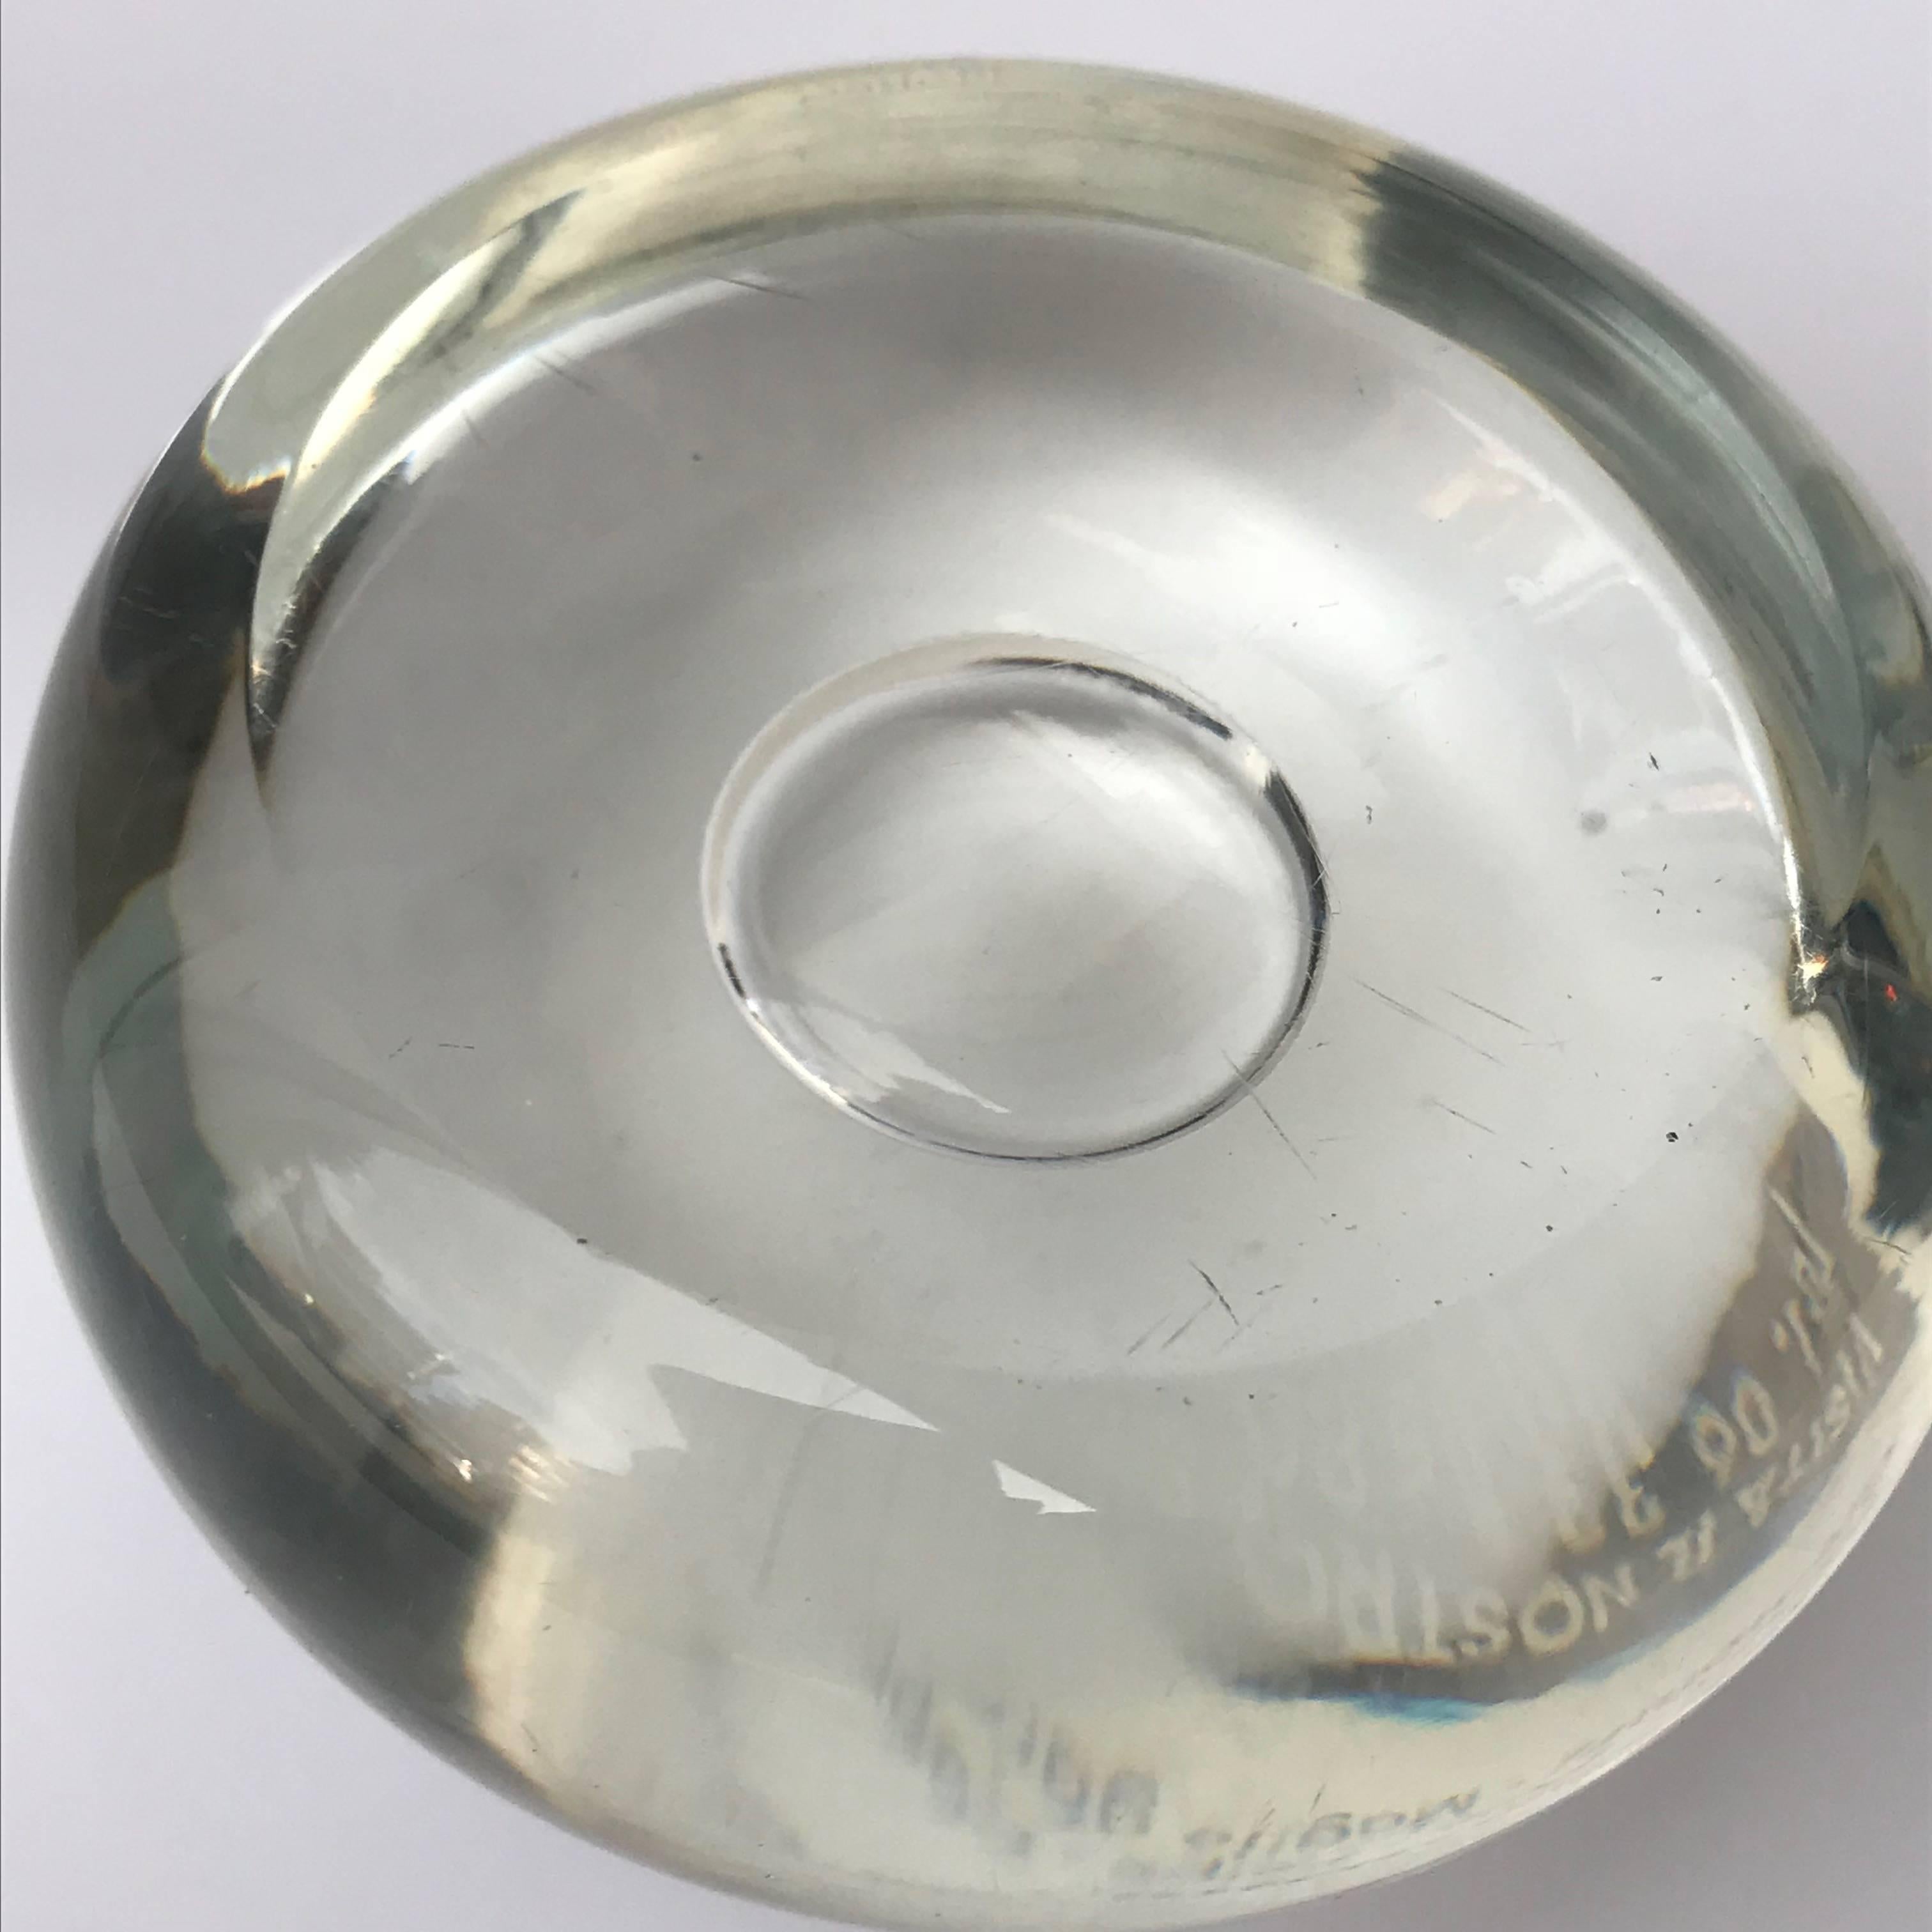 Murano glass paperweight, with air bubble. Barbini style
The paperweight has scratches on the bottom but do not disturb its beauty.
Diameter 9.5 x 6 cm in height.